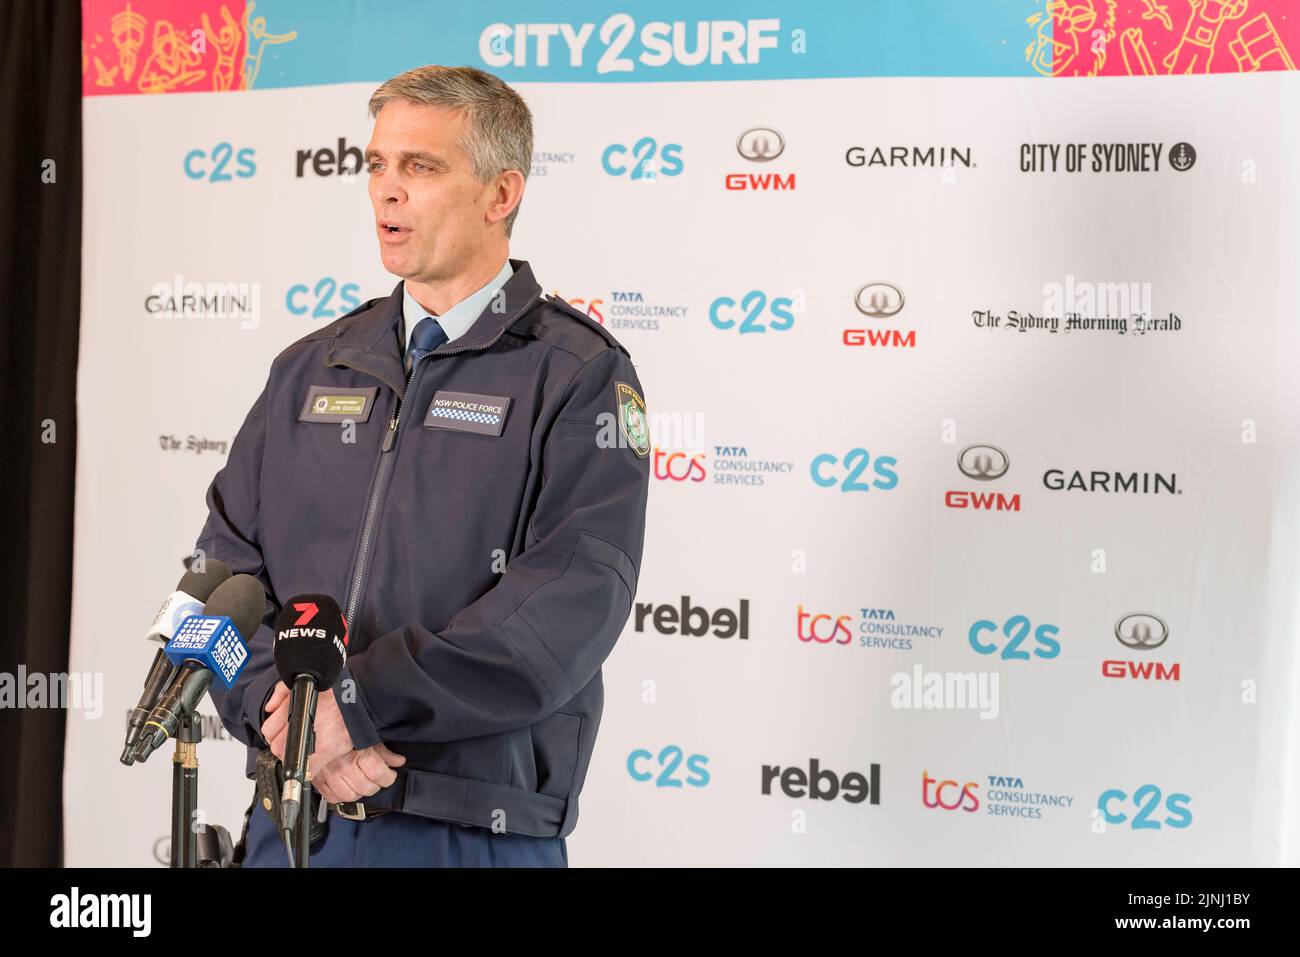 Sydney, Aust.12 Aug 2022: Police Superintendent John Duncan of the Eastern Suburbs Area Command at a press conference prior to the 50th City2Surf race in Sydney on Sunday. This will be the first race since 2019 after cancellations in 2020 and 2021 due to Covid-19 restrictions. 60,000+ people are expected cover the fourteen-kilometre race, the largest of its kind in the world. Superintendent Duncan said that the biggest risks were the weather and the notorious Heartbreak Hill. His advice was to use public transport where possible to and from the event. Credit: Stephen Dwyer Alamy Live News Stock Photo